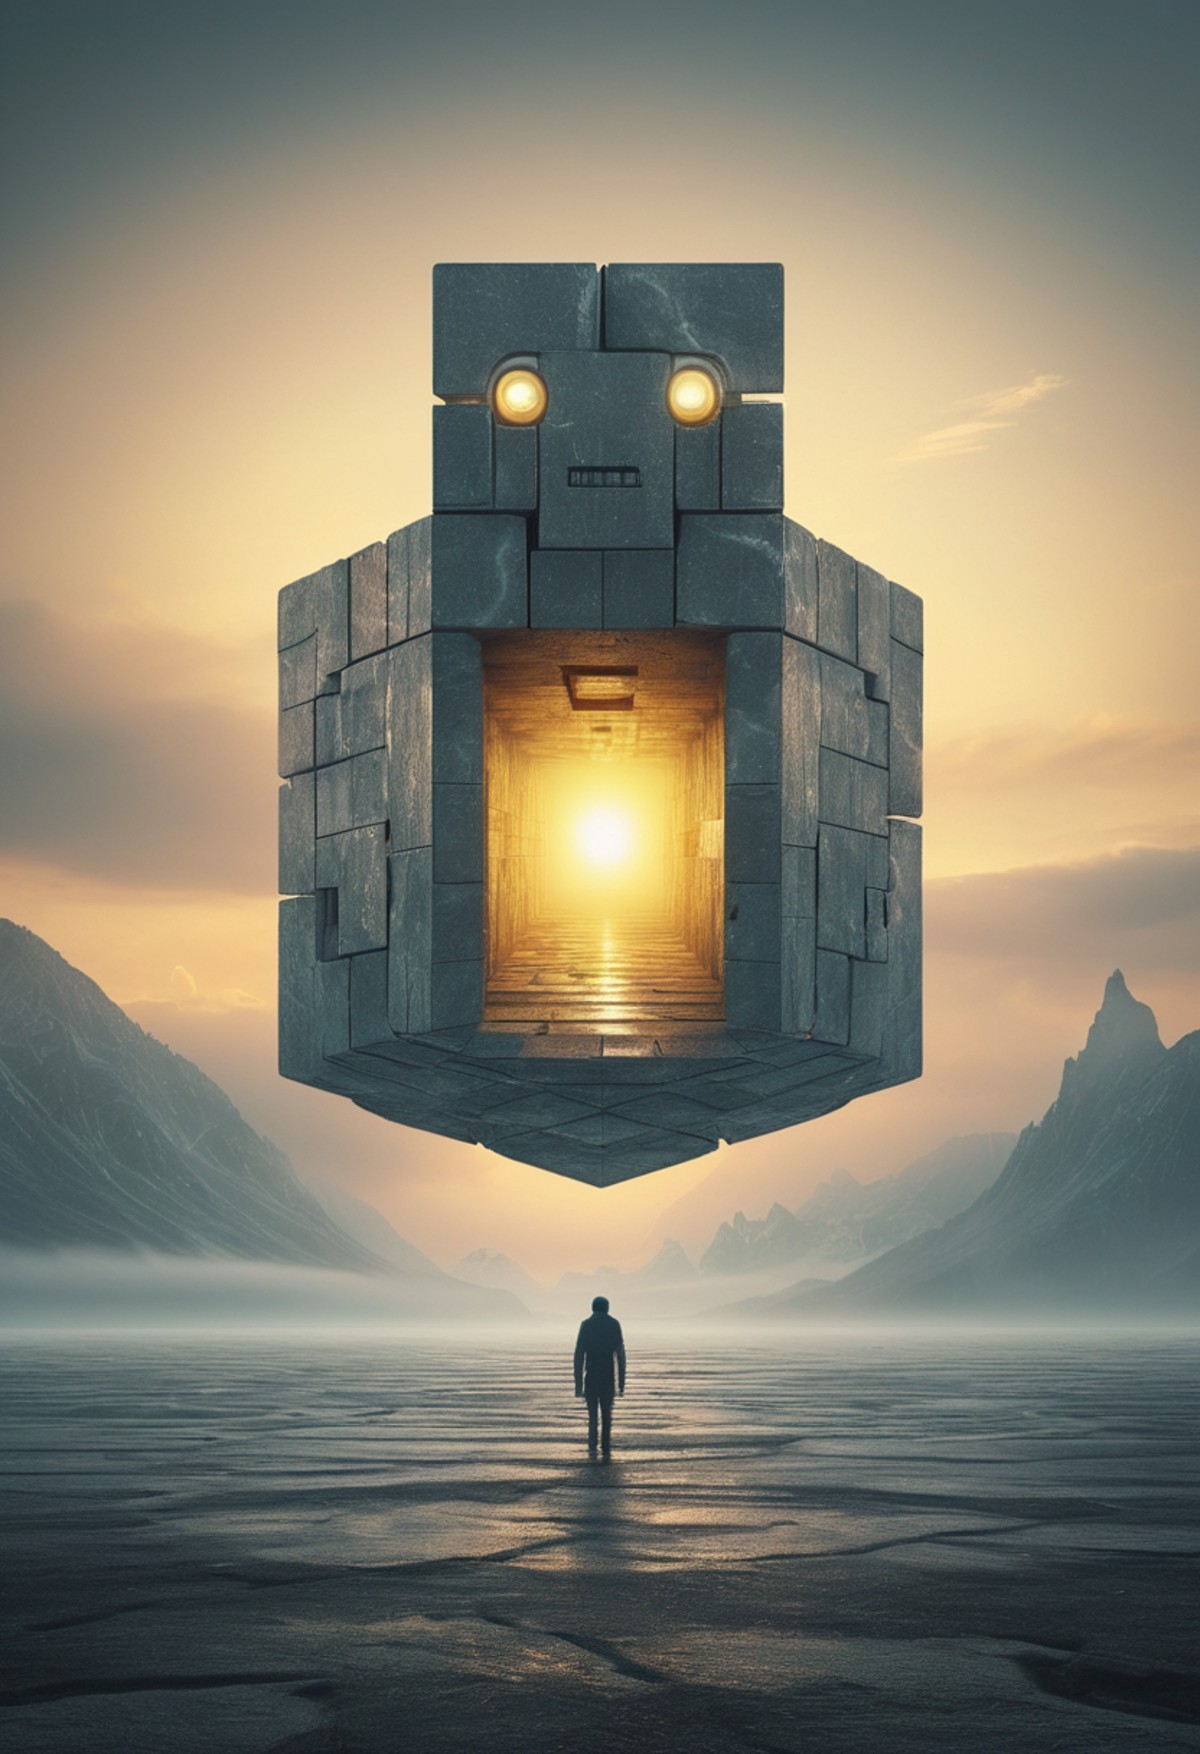 small centered composition, product shot, plain background, designed by Matthias Jung and Andy Fairhurst, wallpaper art, i...